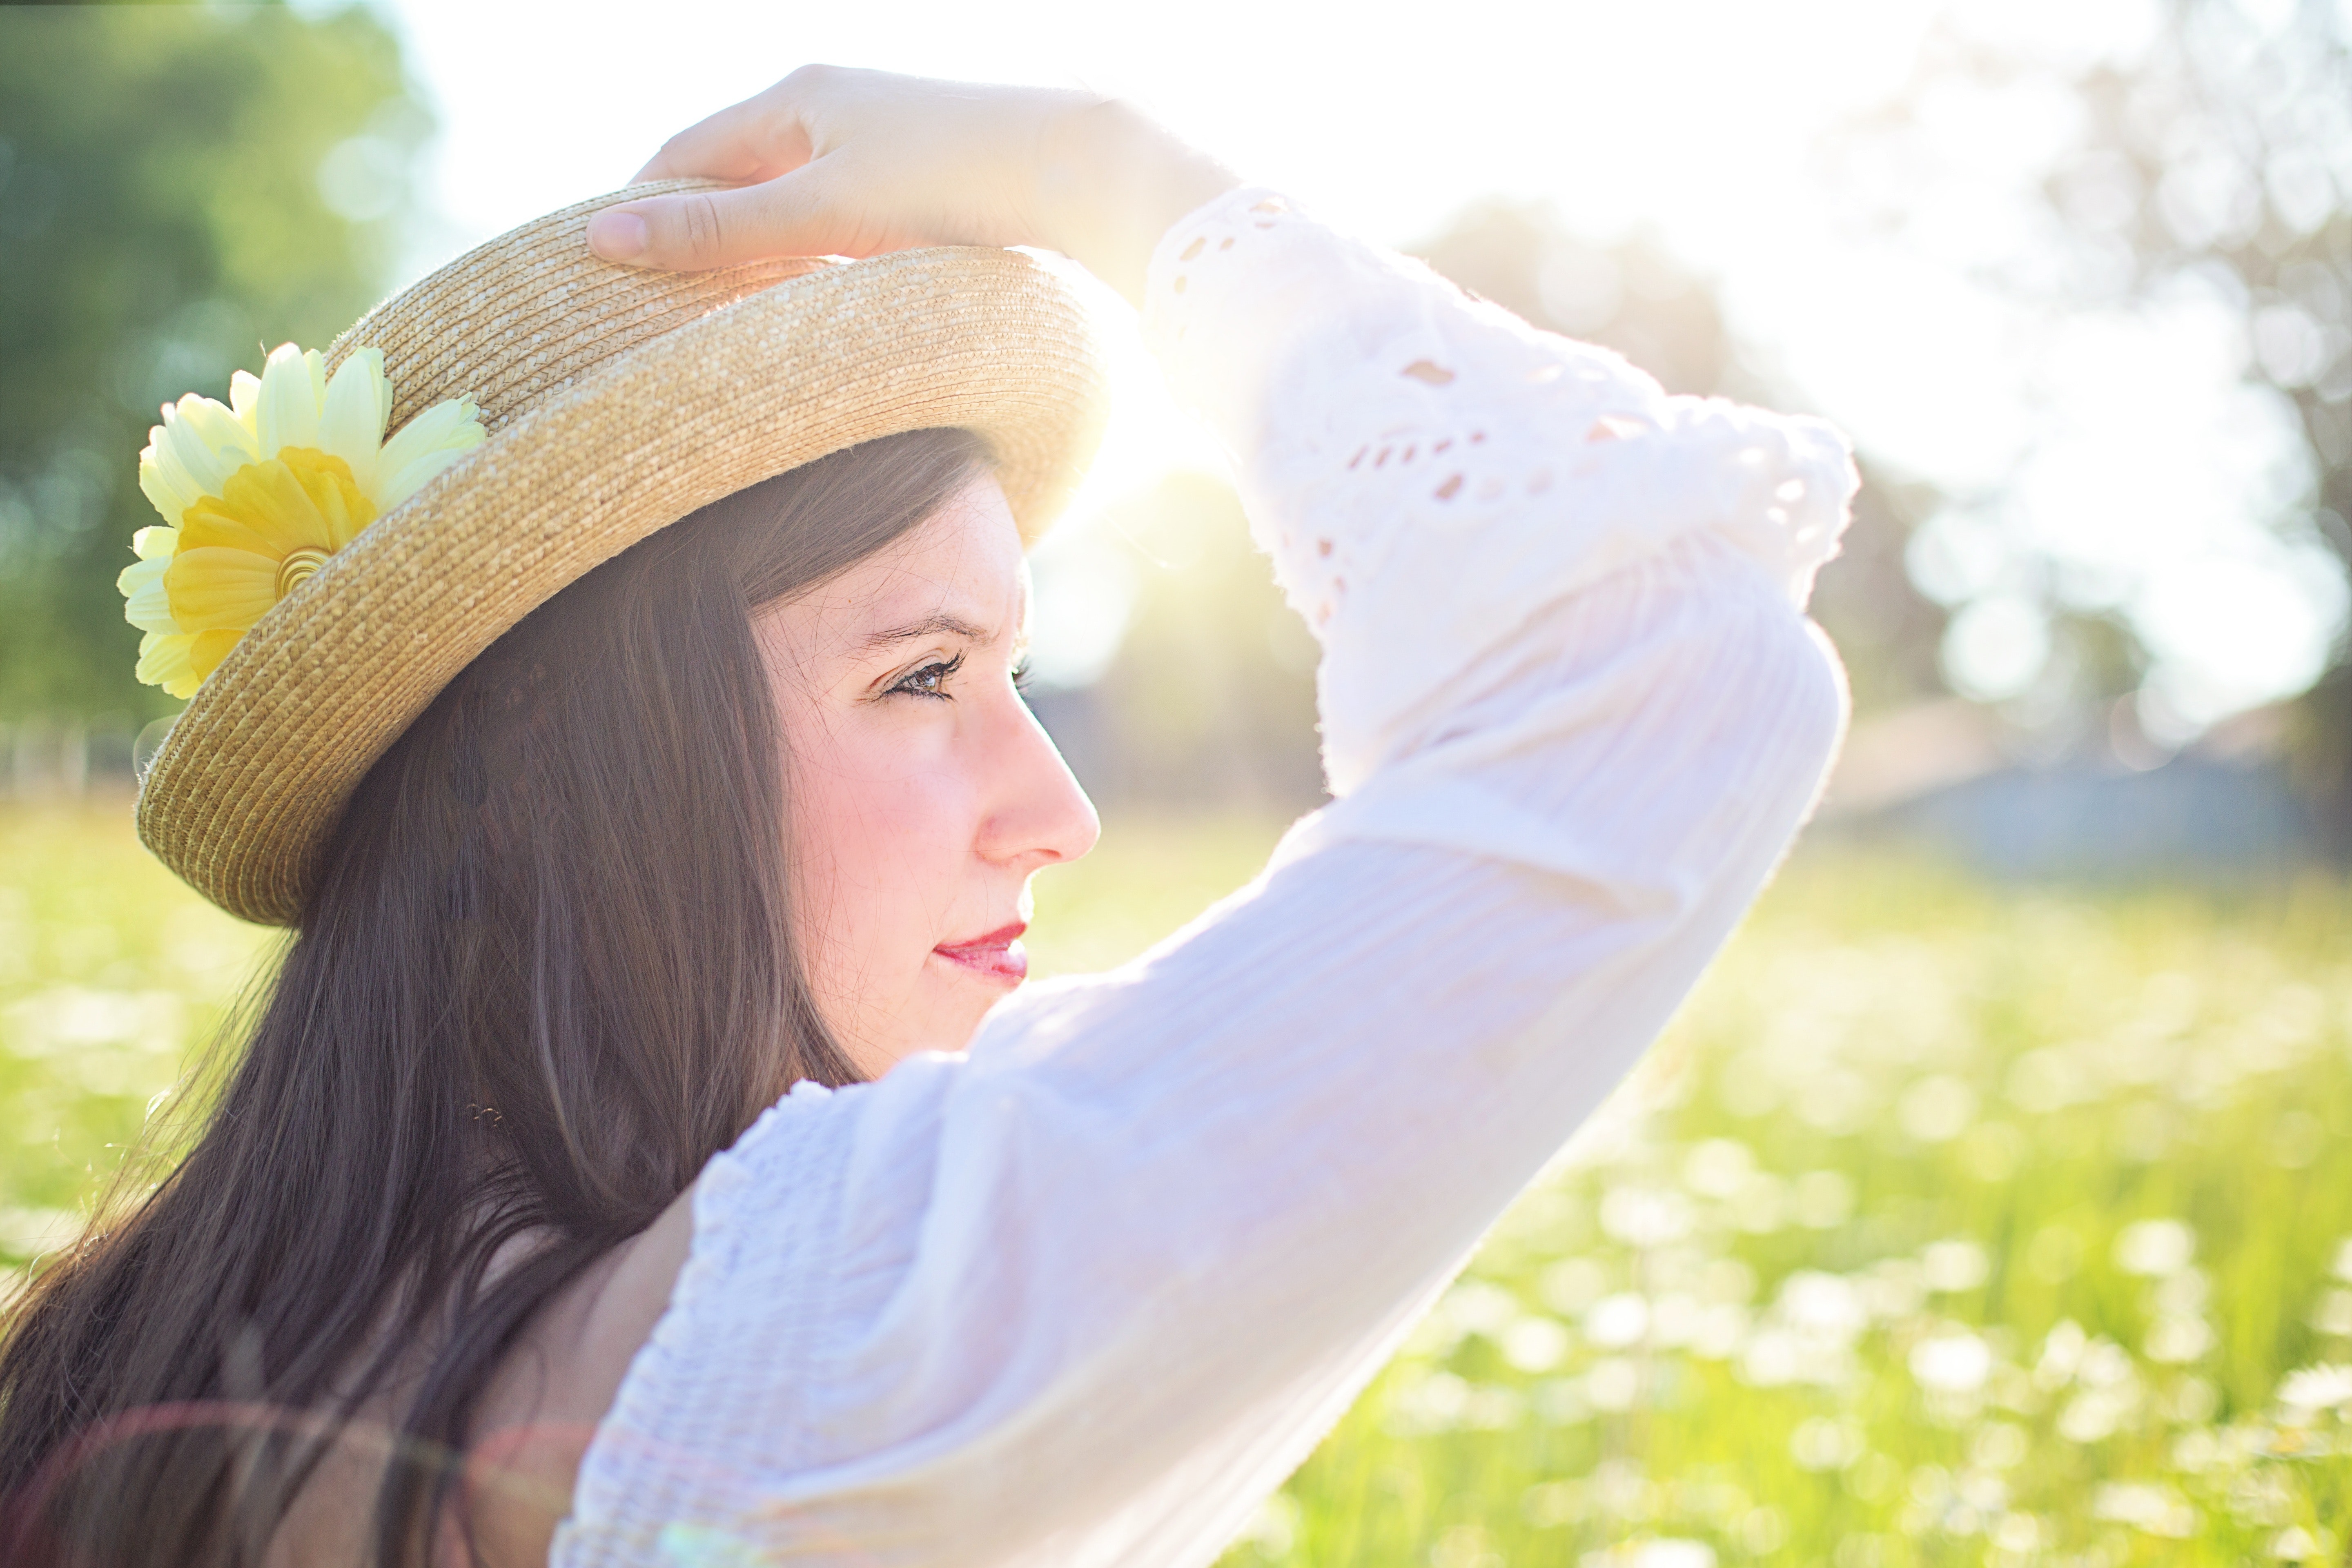 Woman in white long sleeve shirt wearing a straw hat during daytime at flower field photo